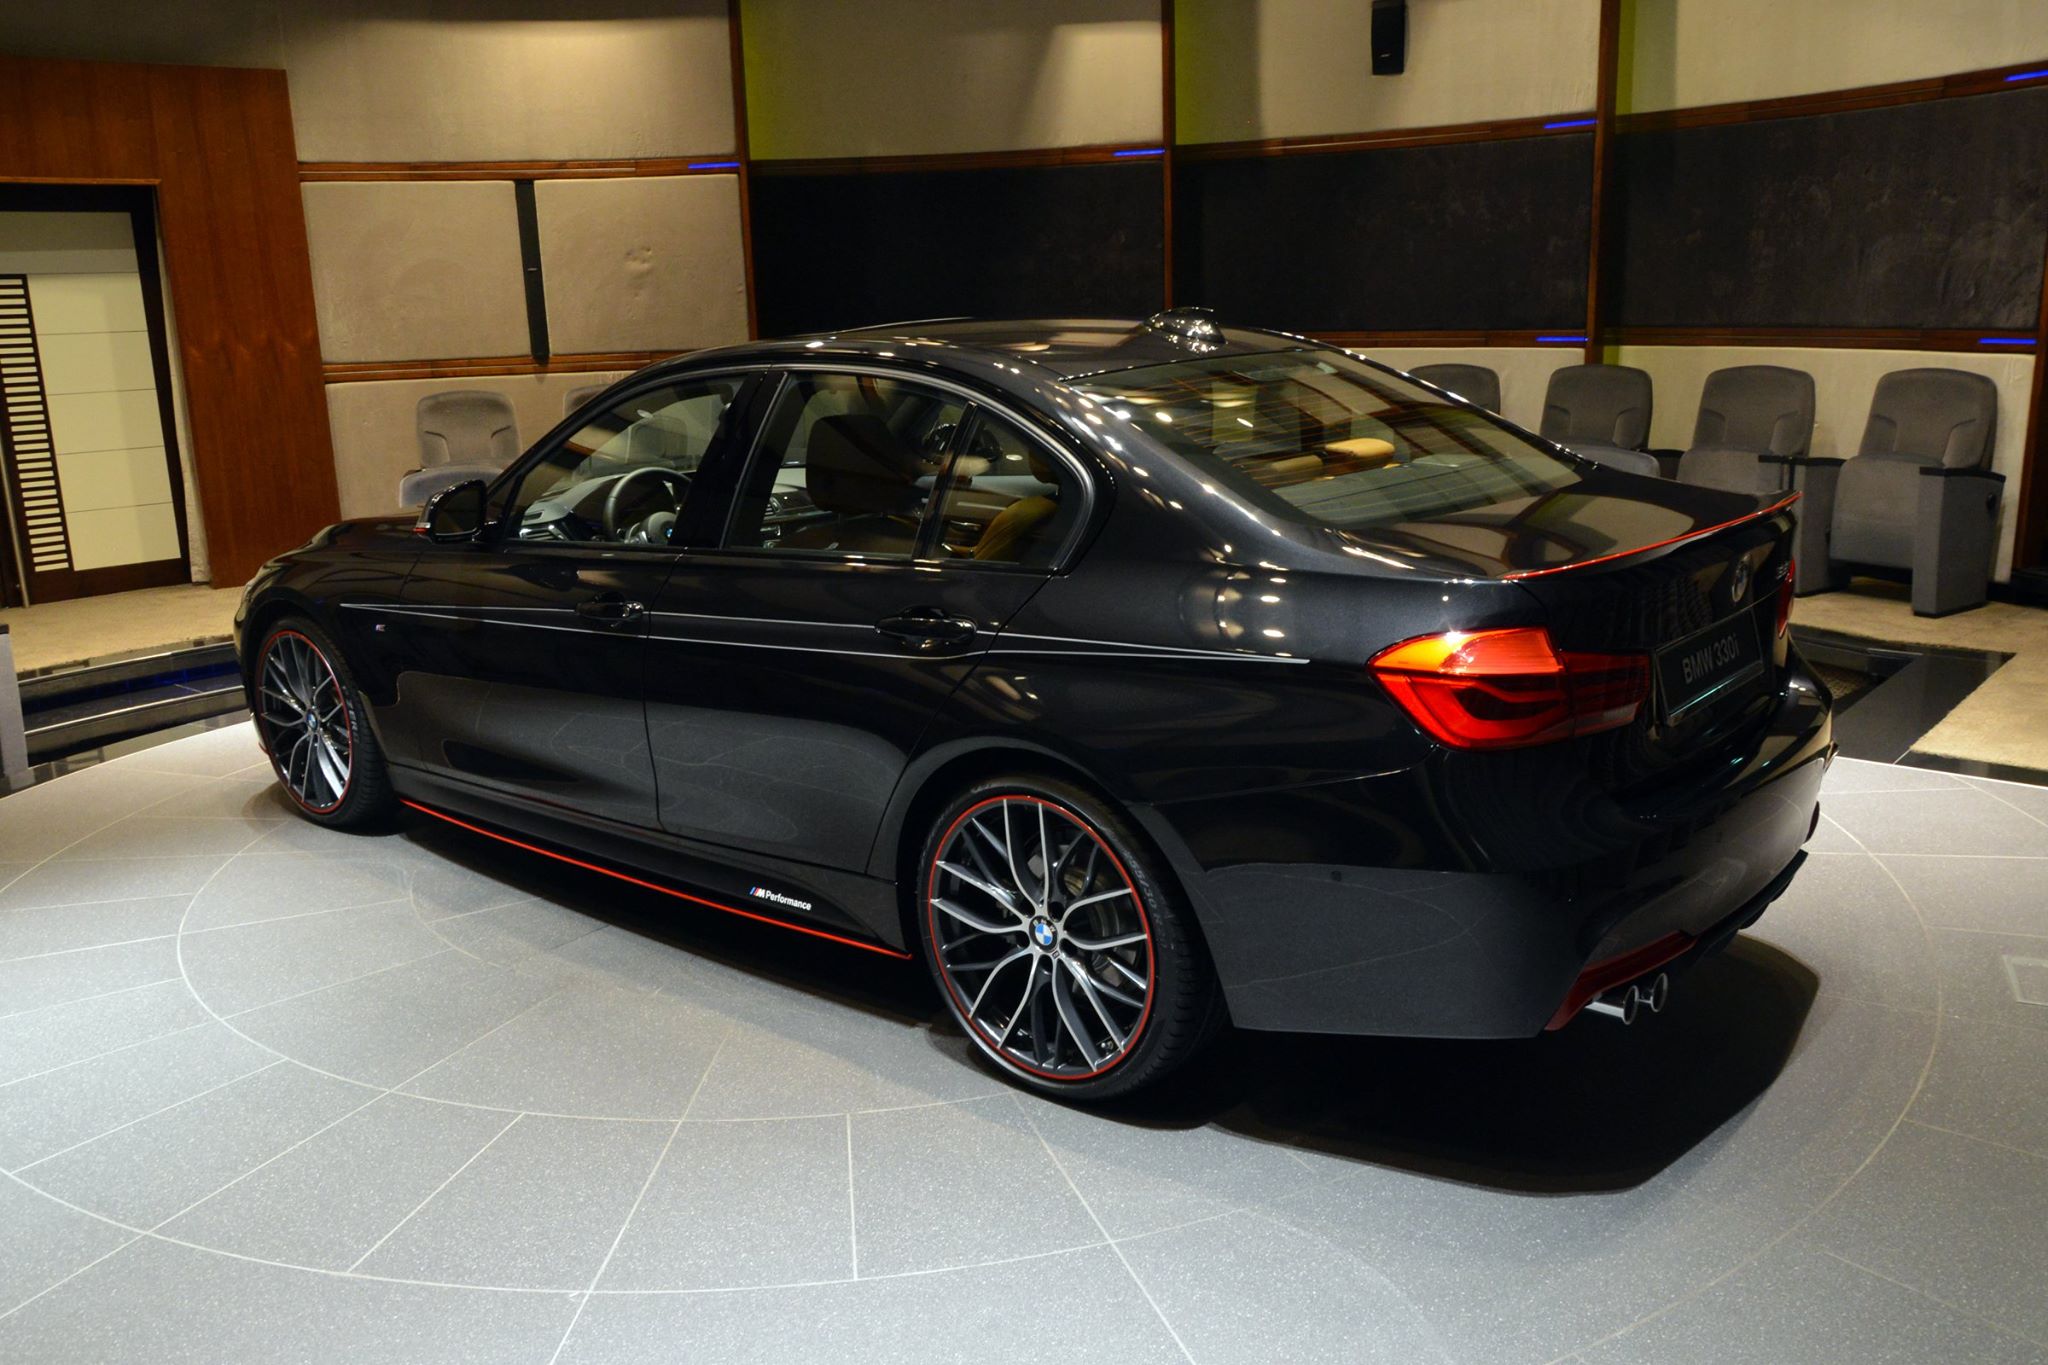 Prices for the BMW 330i F30 LCI start in Germany at 39,750 euros, with M Sp...